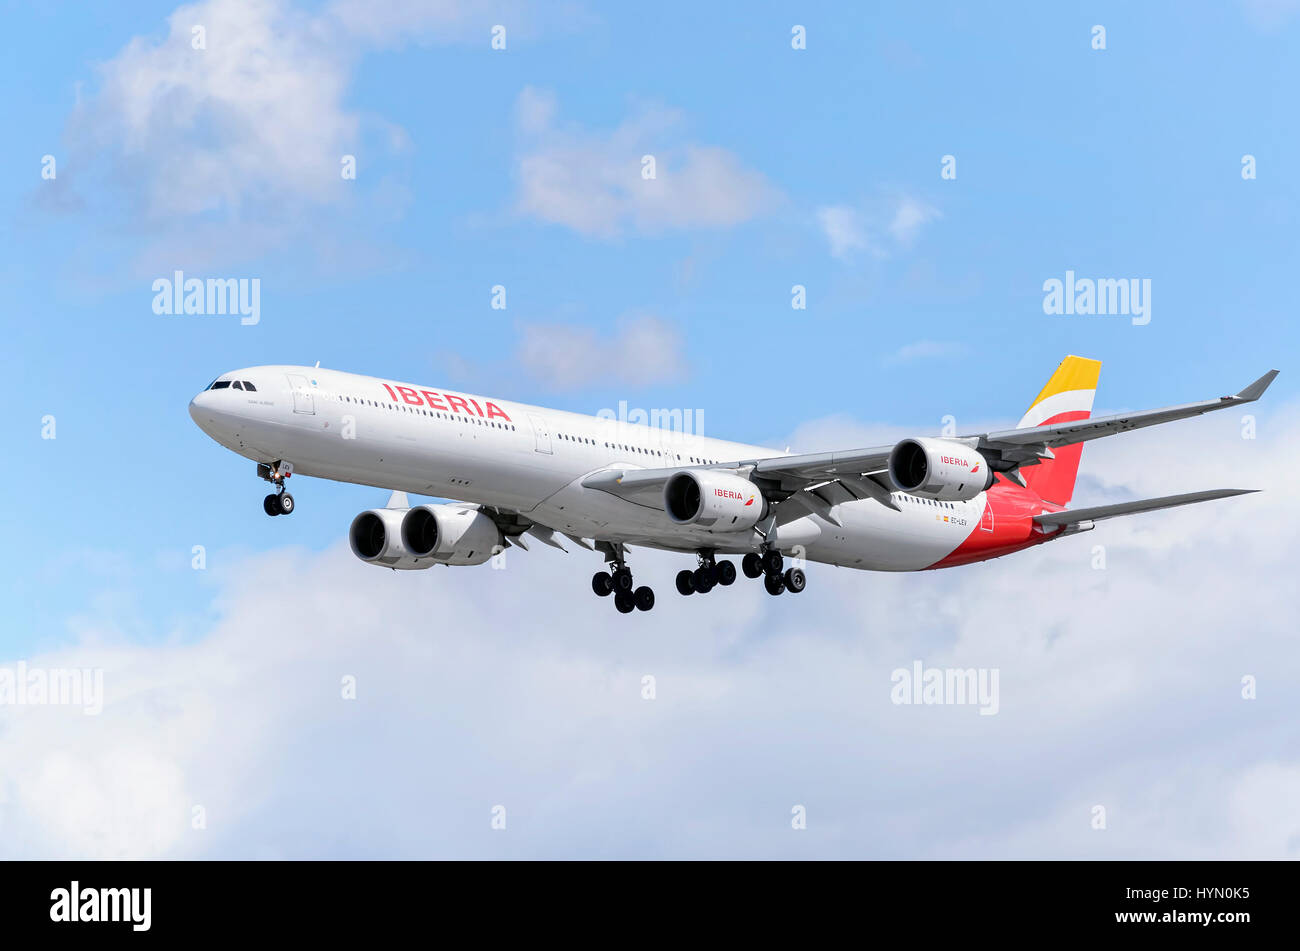 Plane Airbus A340, of spanish airline Iberia, is landing in Madrid - Barajas, Adolfo Suarez airport. Blue sky with clouds. Stock Photo